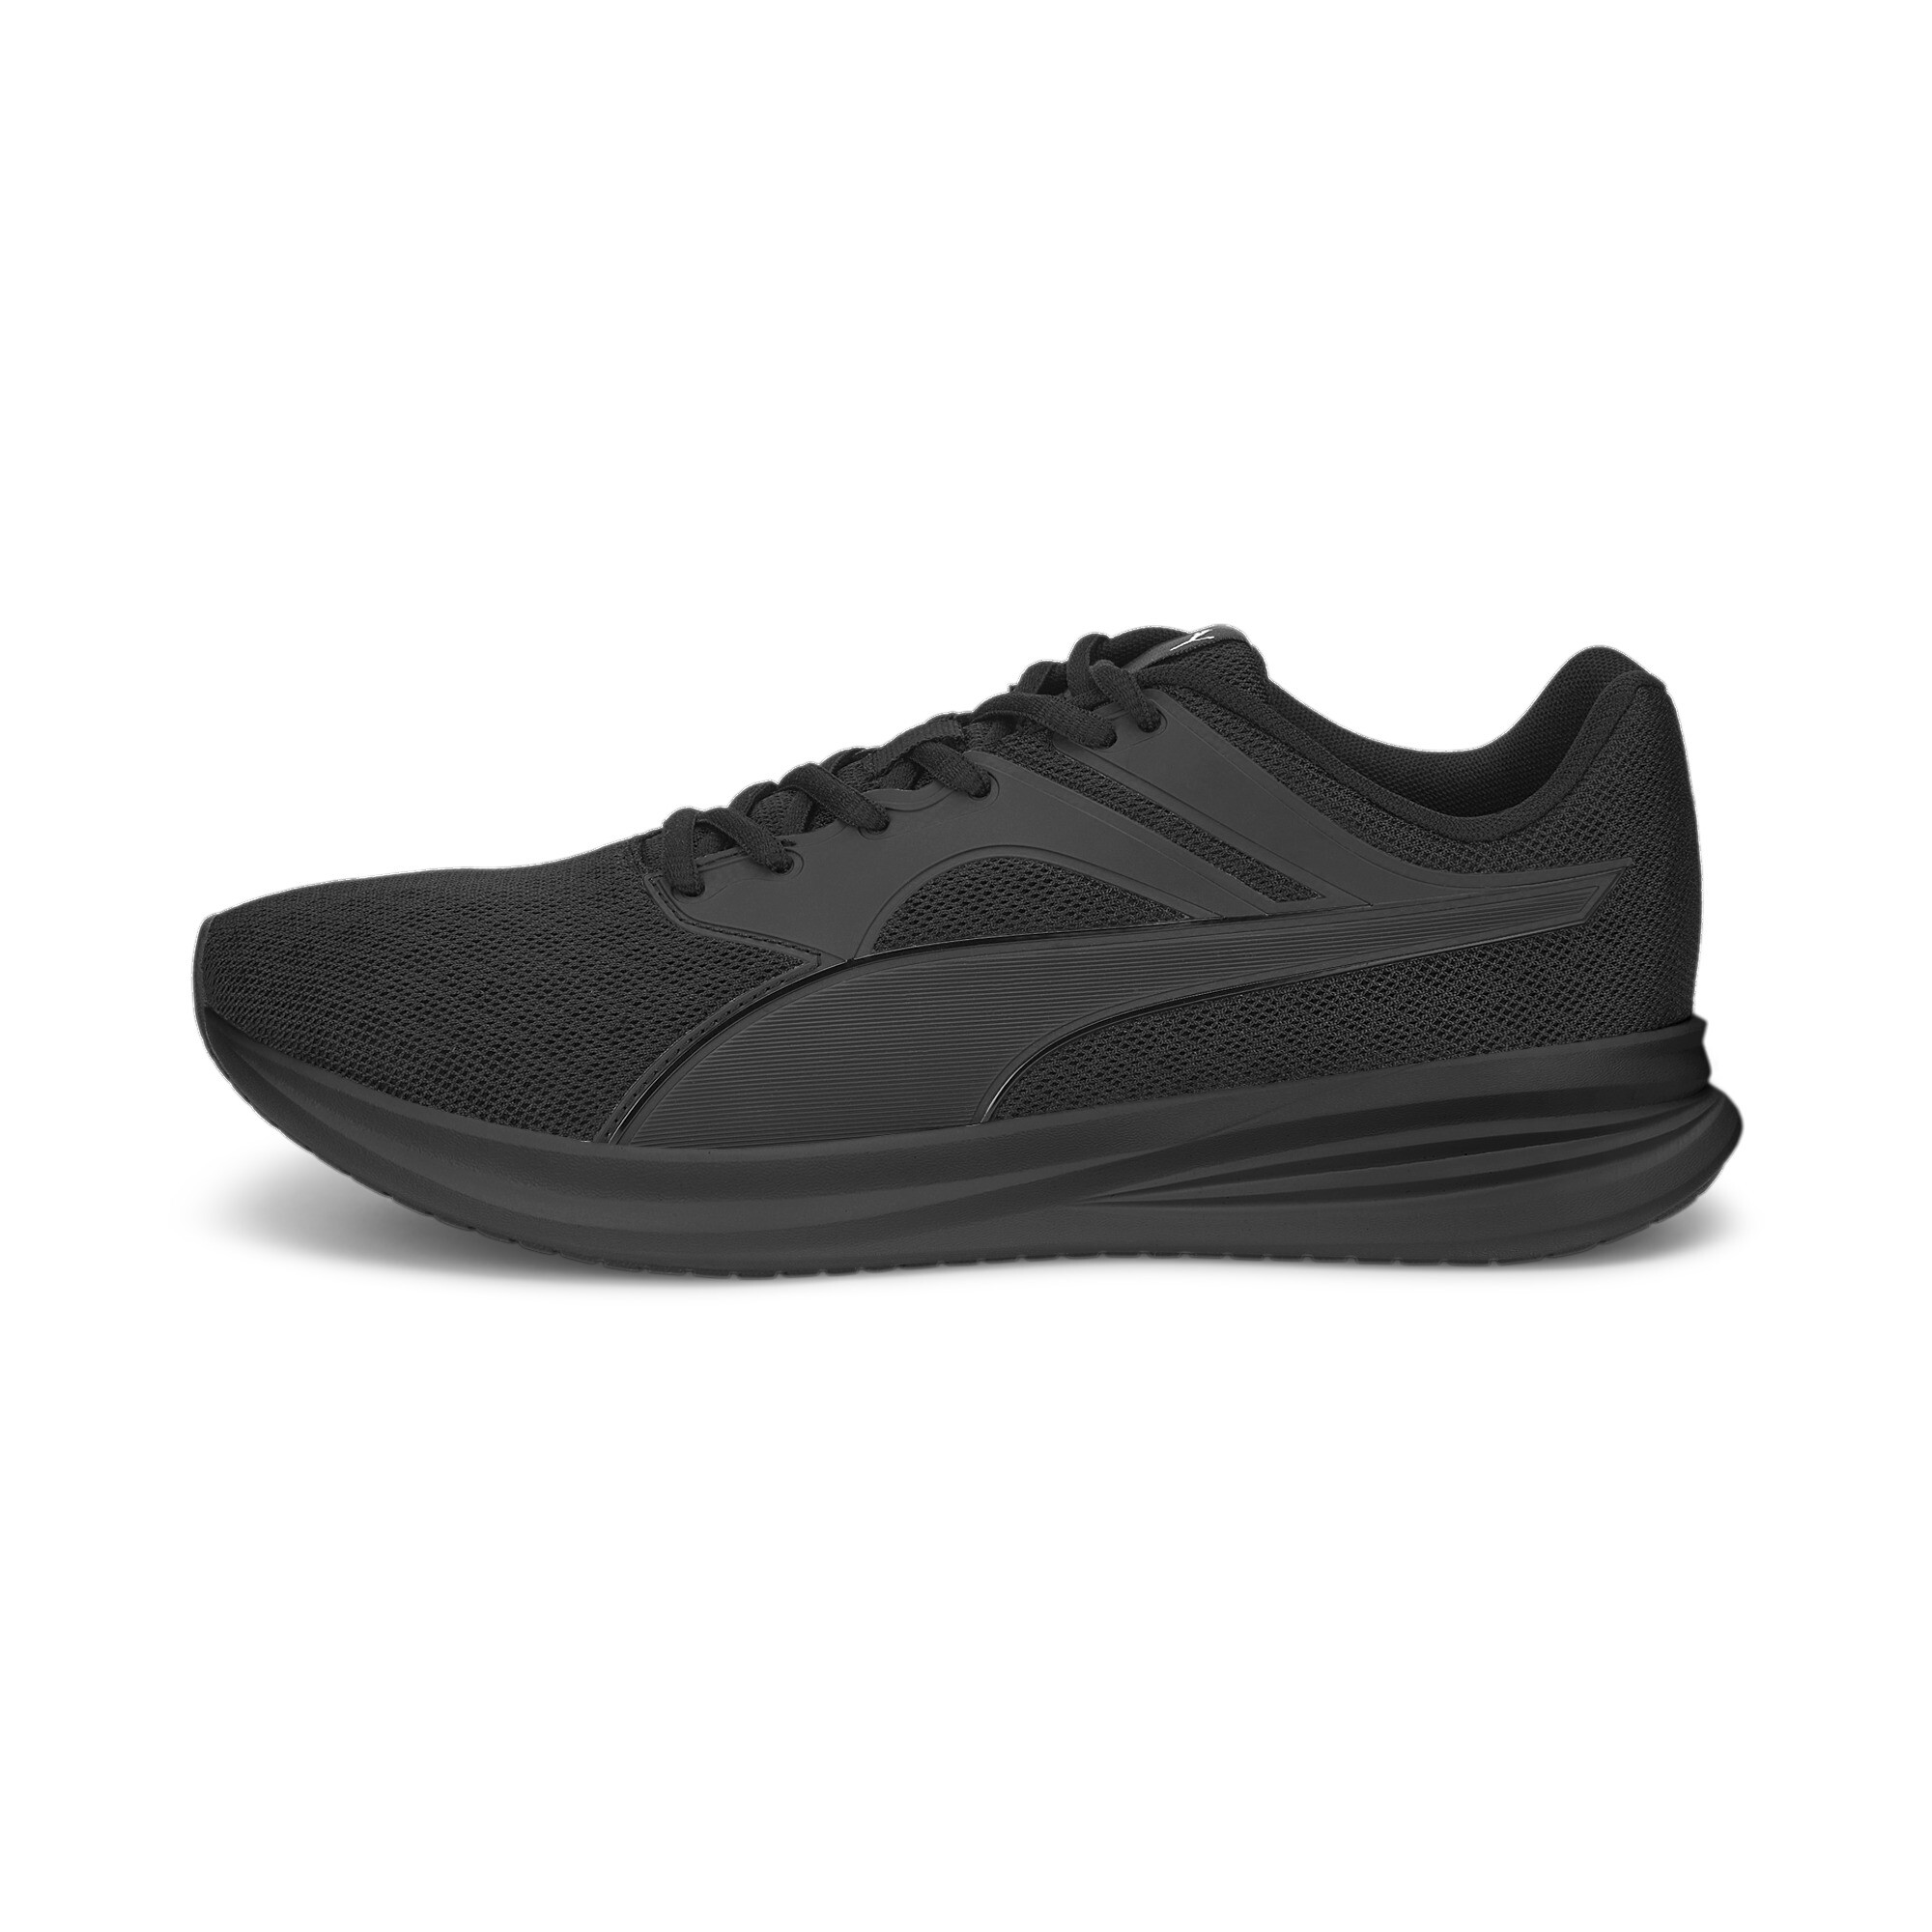 Puma Transport Running Shoes, Black, Size 37, Shoes